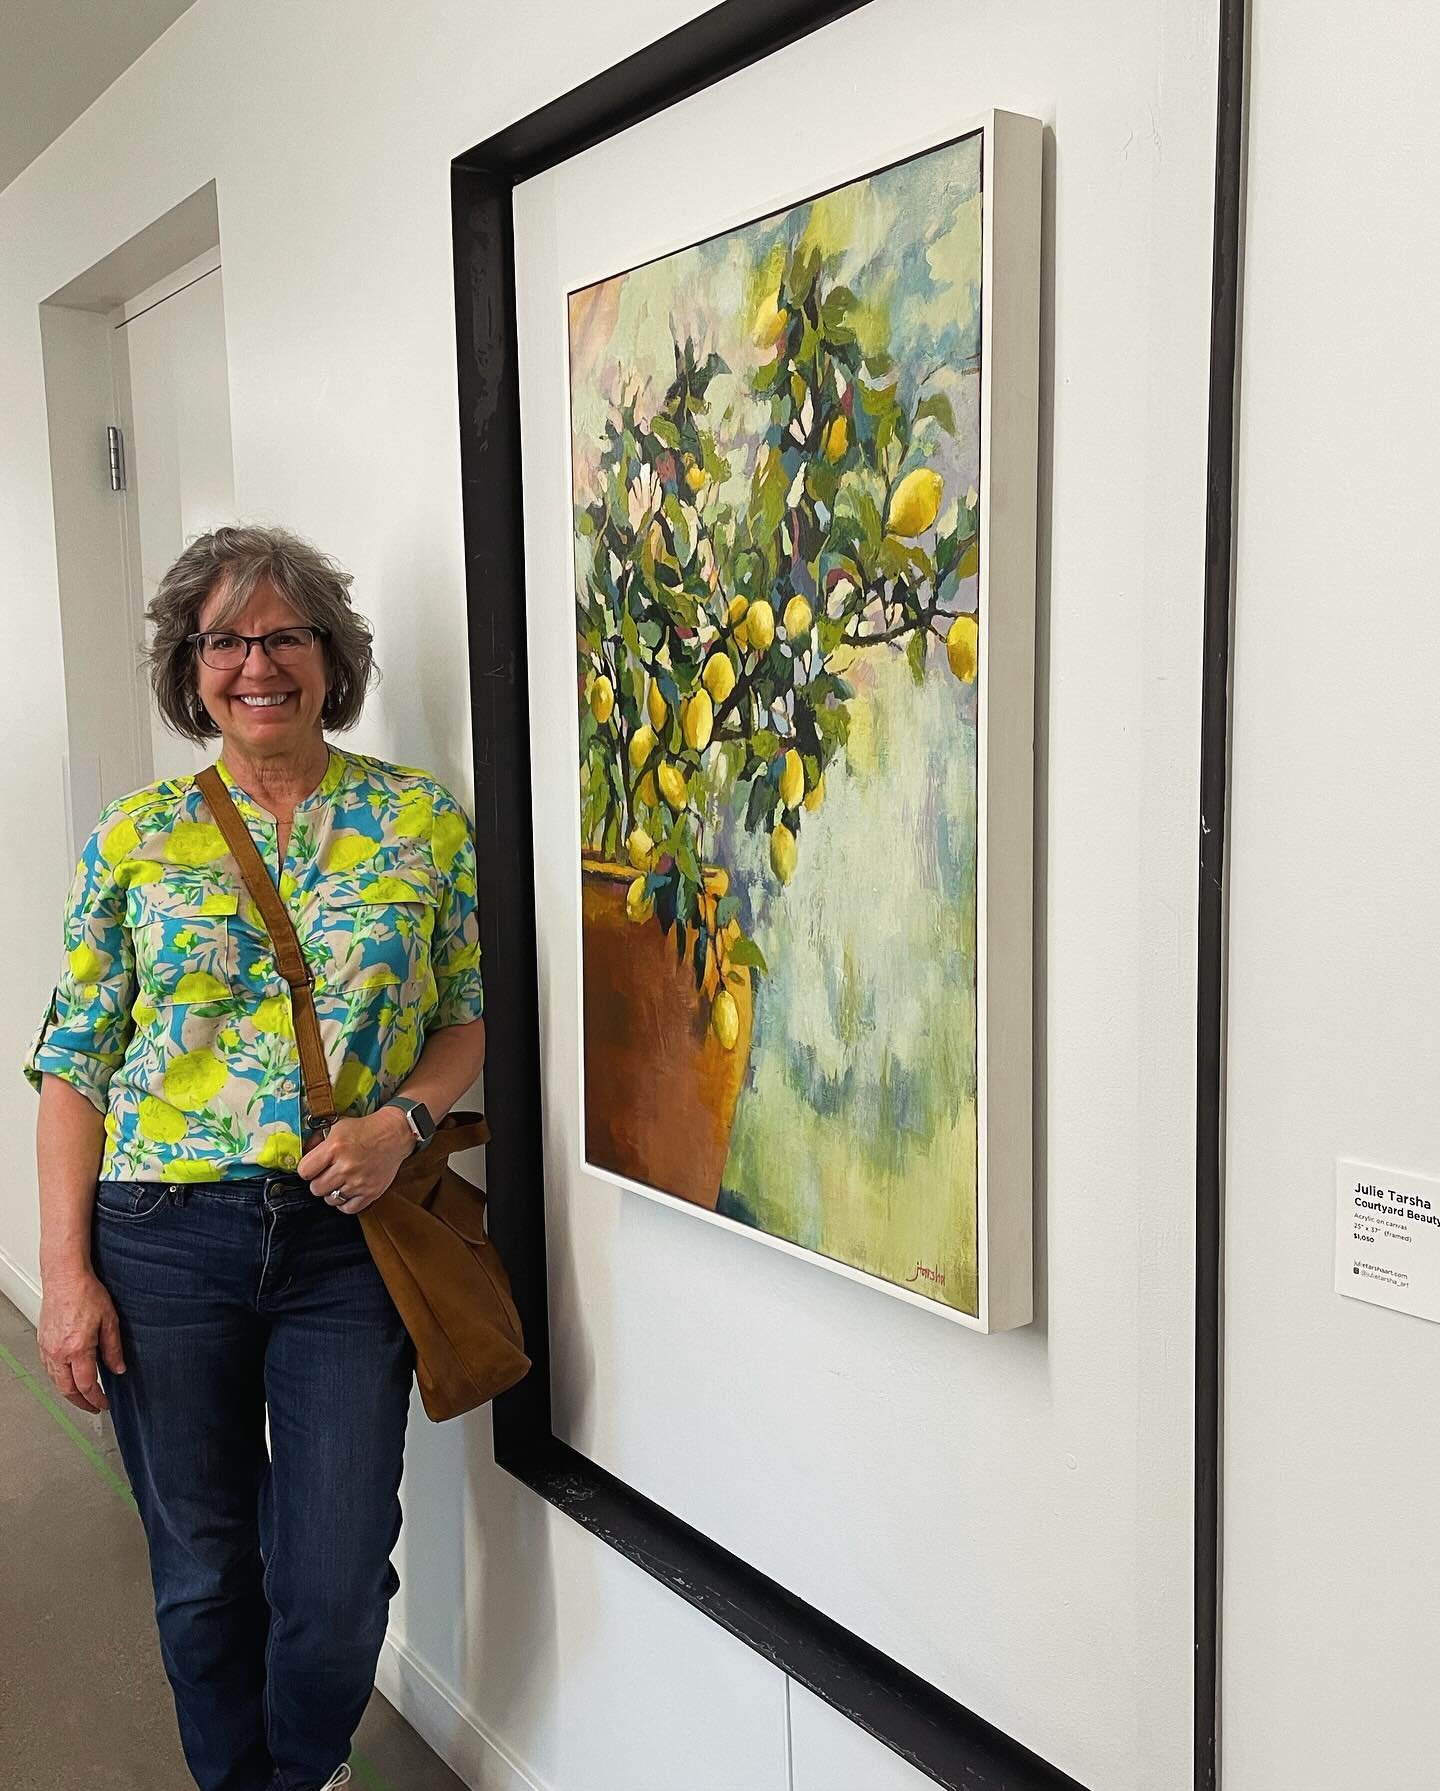 I really appreciate our local art program- @artlink_phoenix for their promotion of the arts in the Phoenix area. 

This exhibition is the 14th cycle at Portland on the Park, a downtown luxury condominium that has created a gallery space that connects